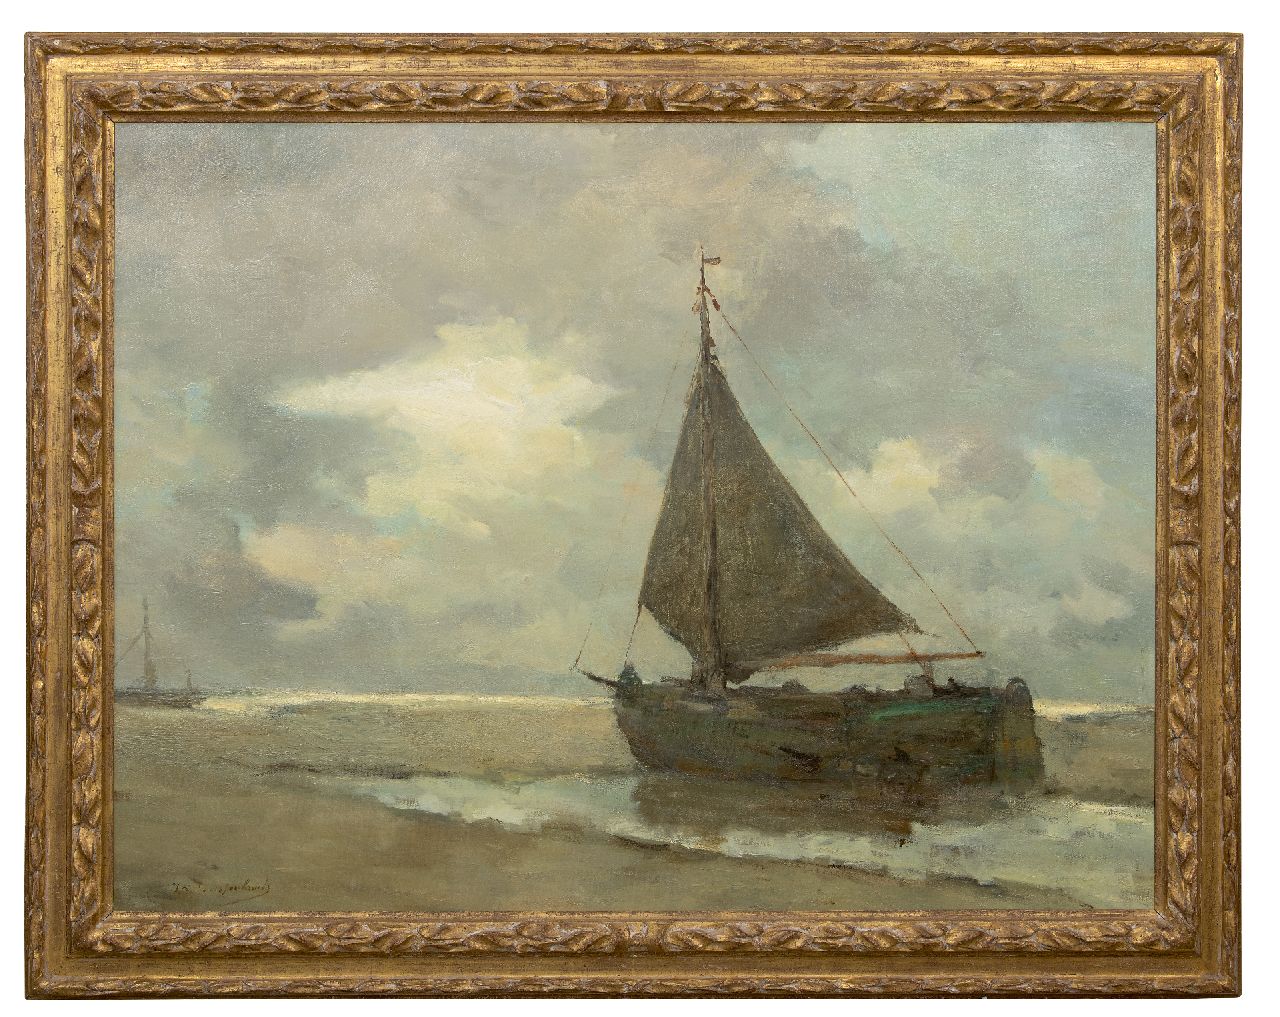 Weissenbruch H.J.  | Hendrik Johannes 'J.H.' Weissenbruch | Paintings offered for sale | Ship on the beach of Zeeland, oil on canvas 102.3 x 135.8 cm, signed l.l. and 1901